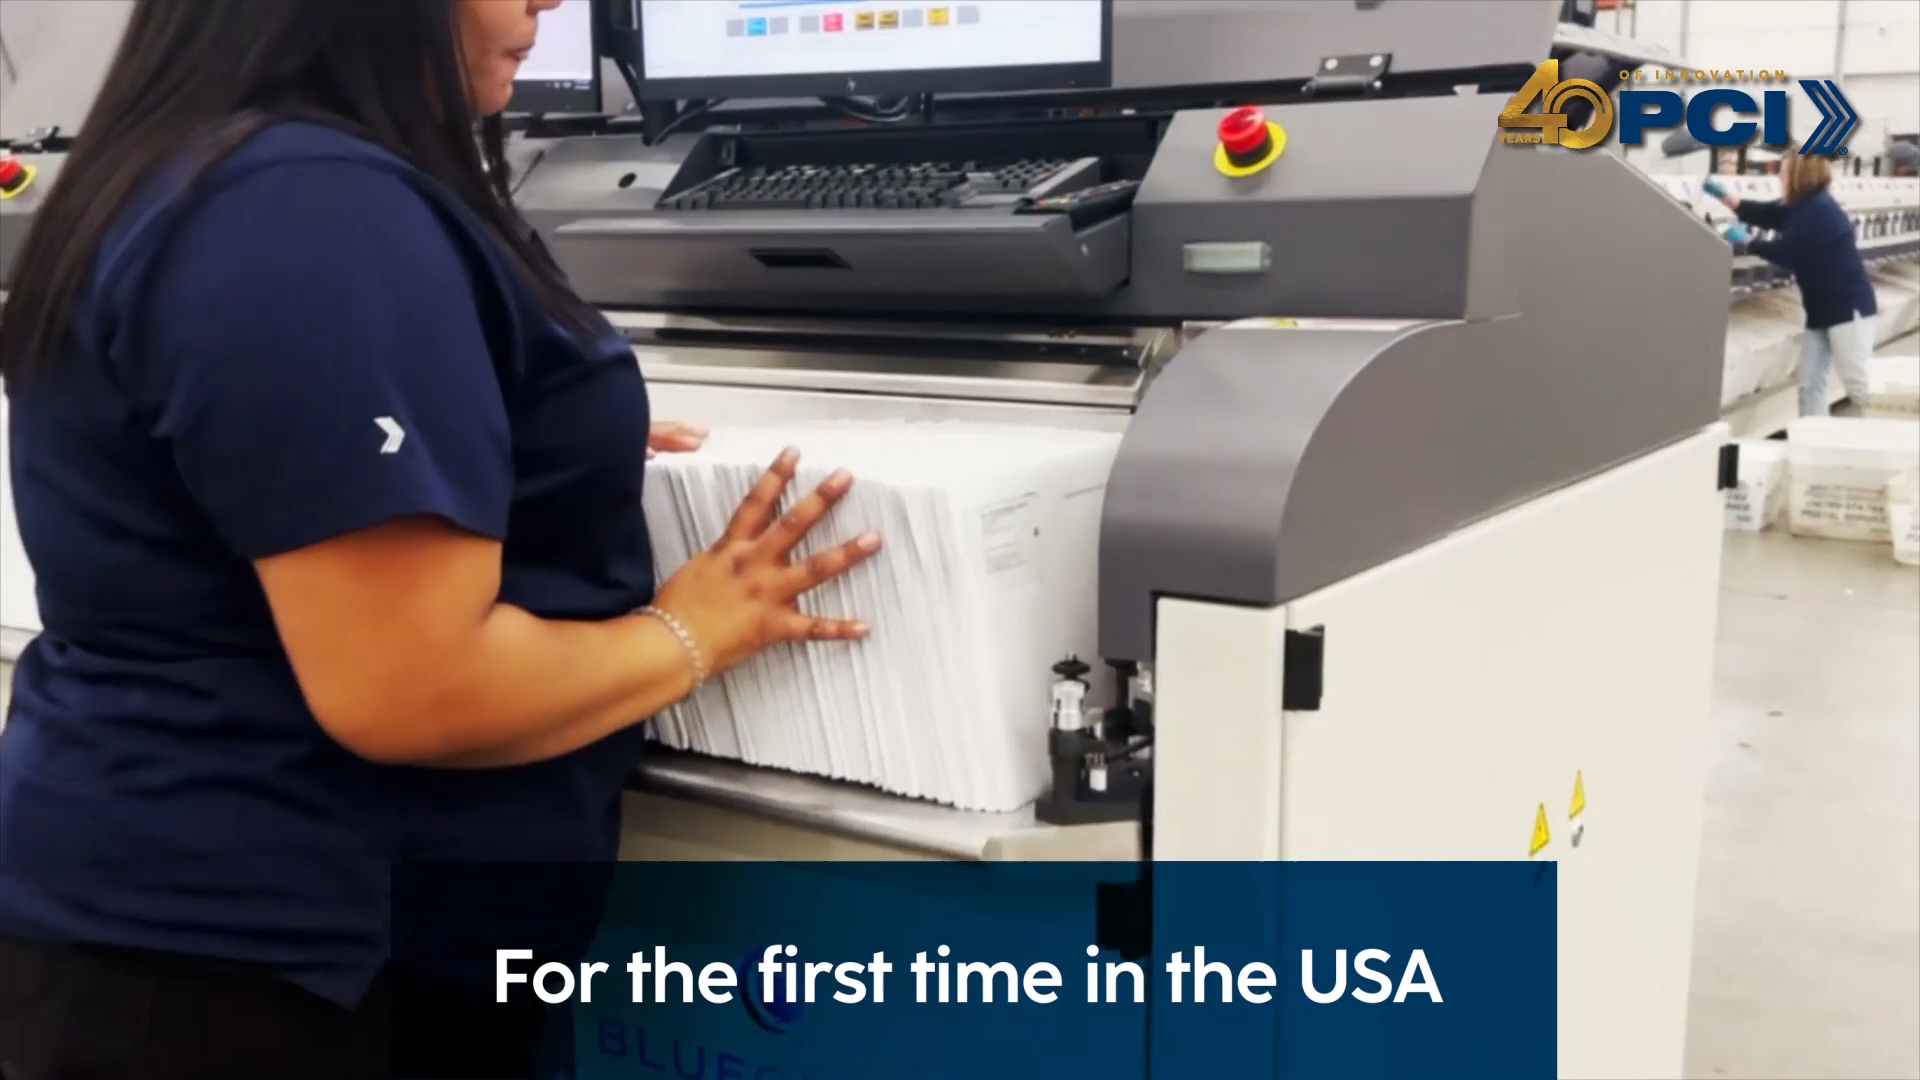 Postal Center International acquires the first BlueCrest Vantage Mixed Thickness and Mixed Weight Flat Sorters in the USA, running on NetSort.